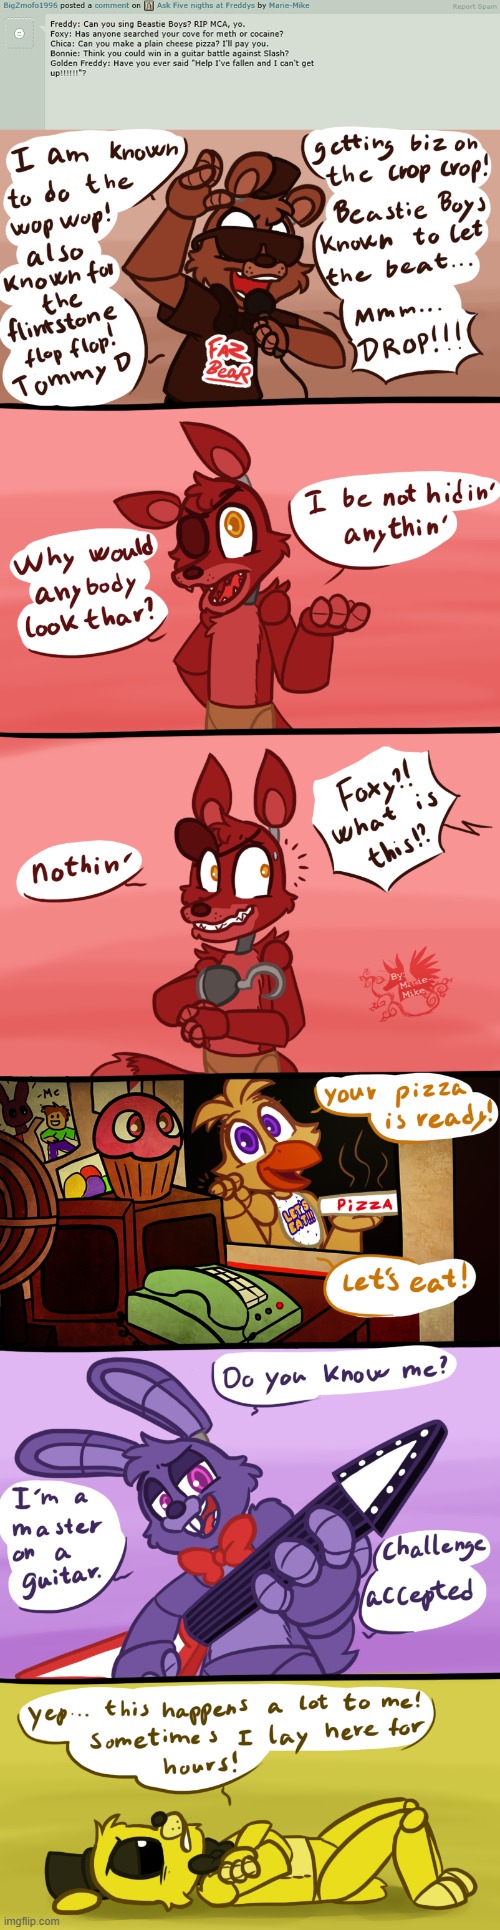 image tagged in five nights at freddys,freddy fazbear,foxy five nights at freddy's,chica,bonnie,golden freddy | made w/ Imgflip meme maker